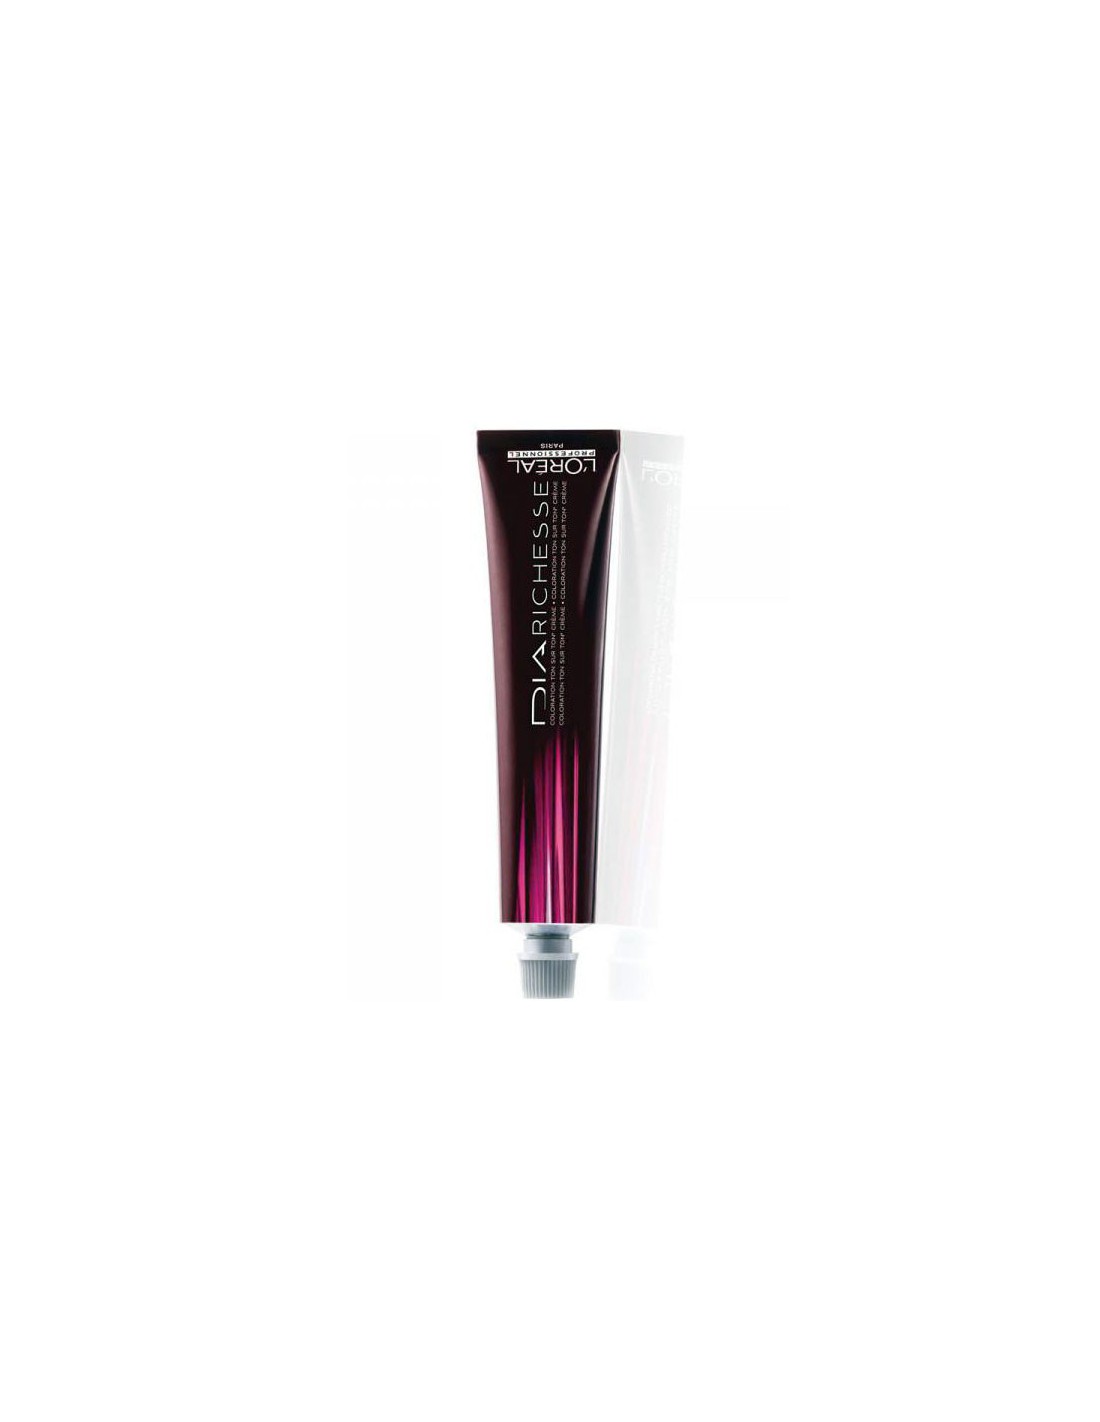 Loreal dia richesse 50ml, color 5,31 : : Beauty